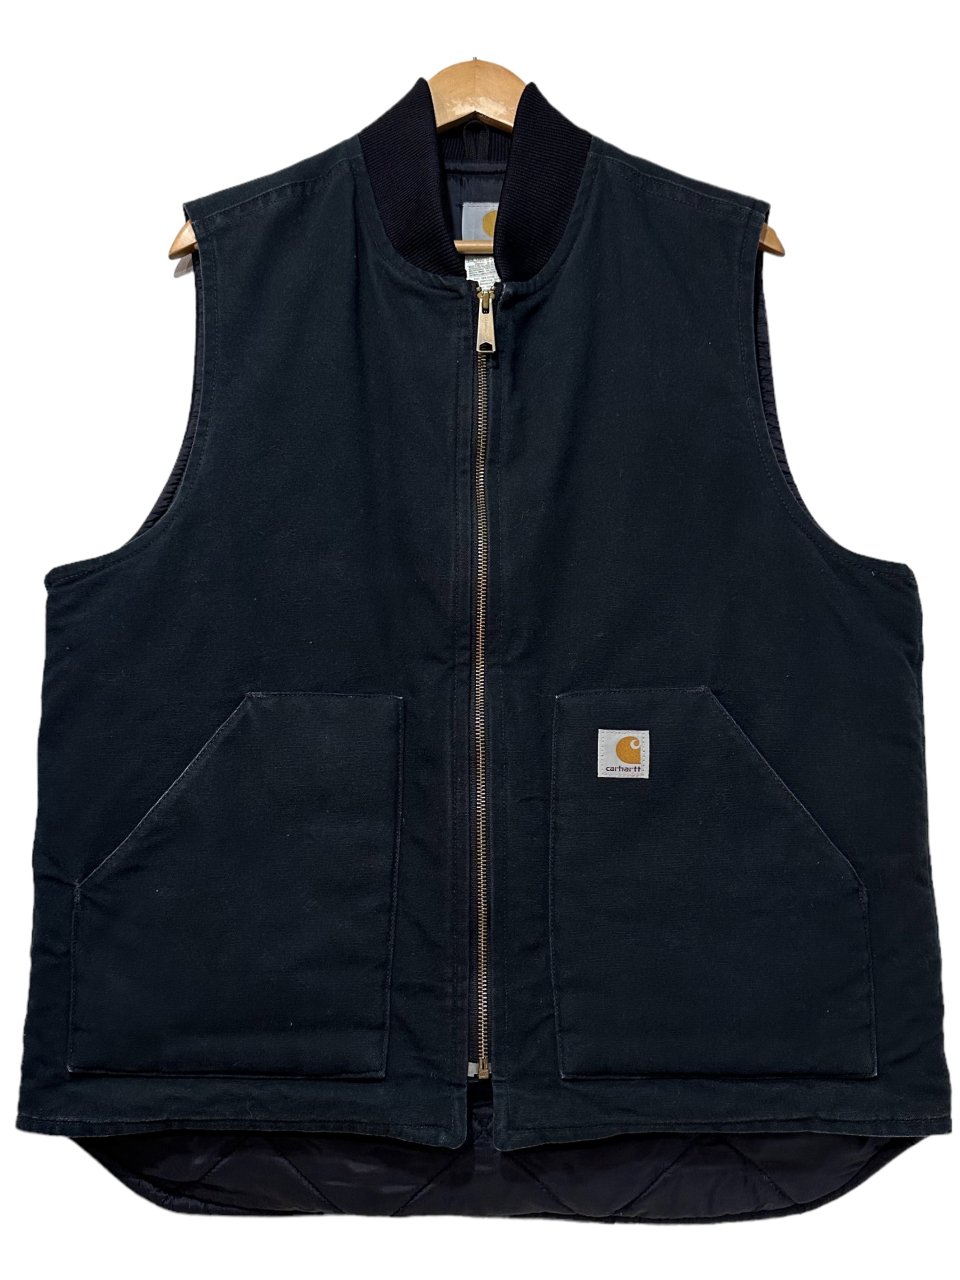 00s Carhartt Quilting Lined Duck Vest 黒 L-TALL カーハート ダック